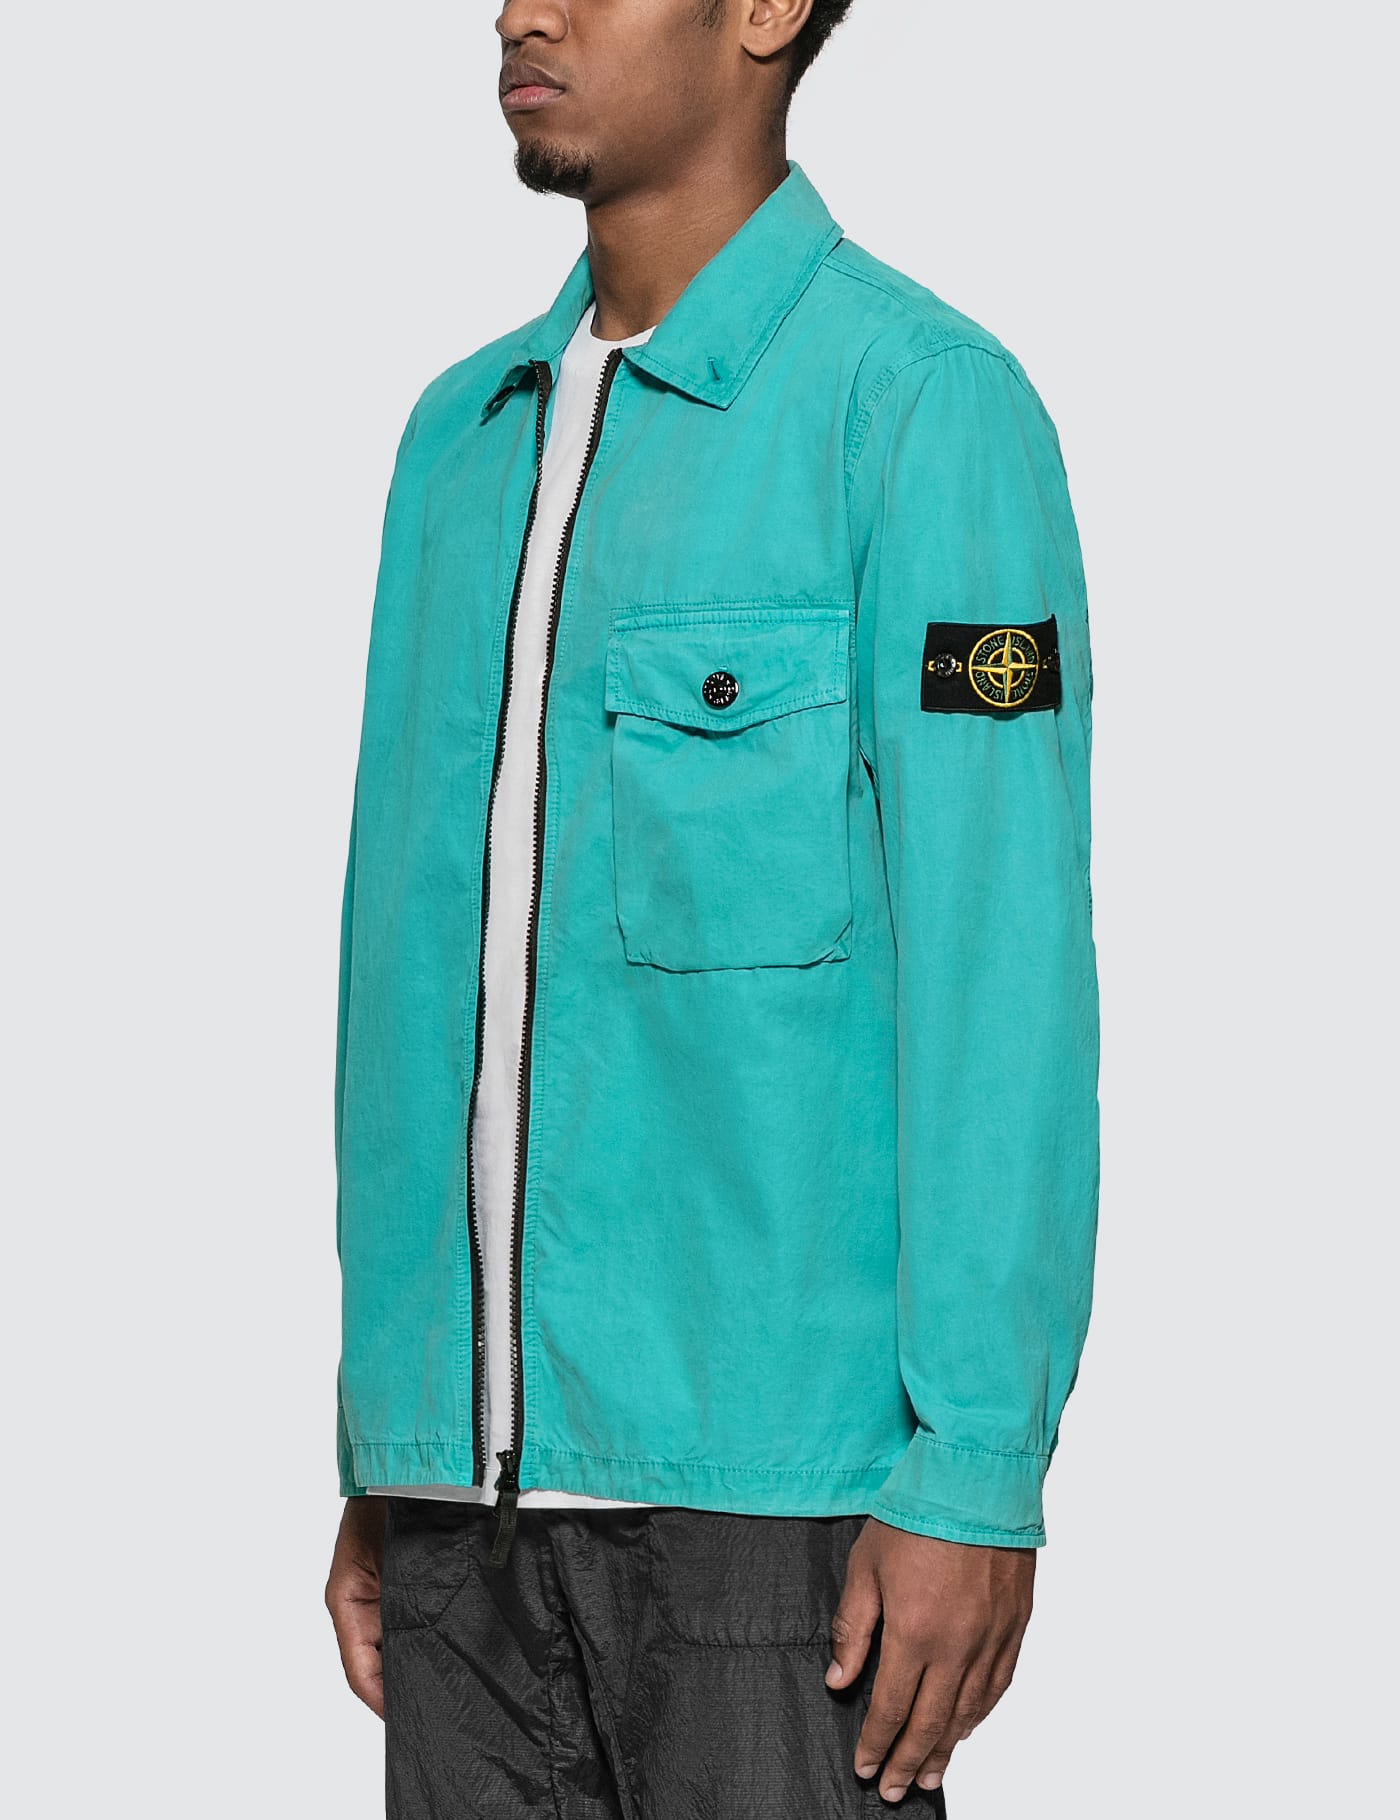 Stone Island - Zip Overshirt | HBX - Globally Curated Fashion and